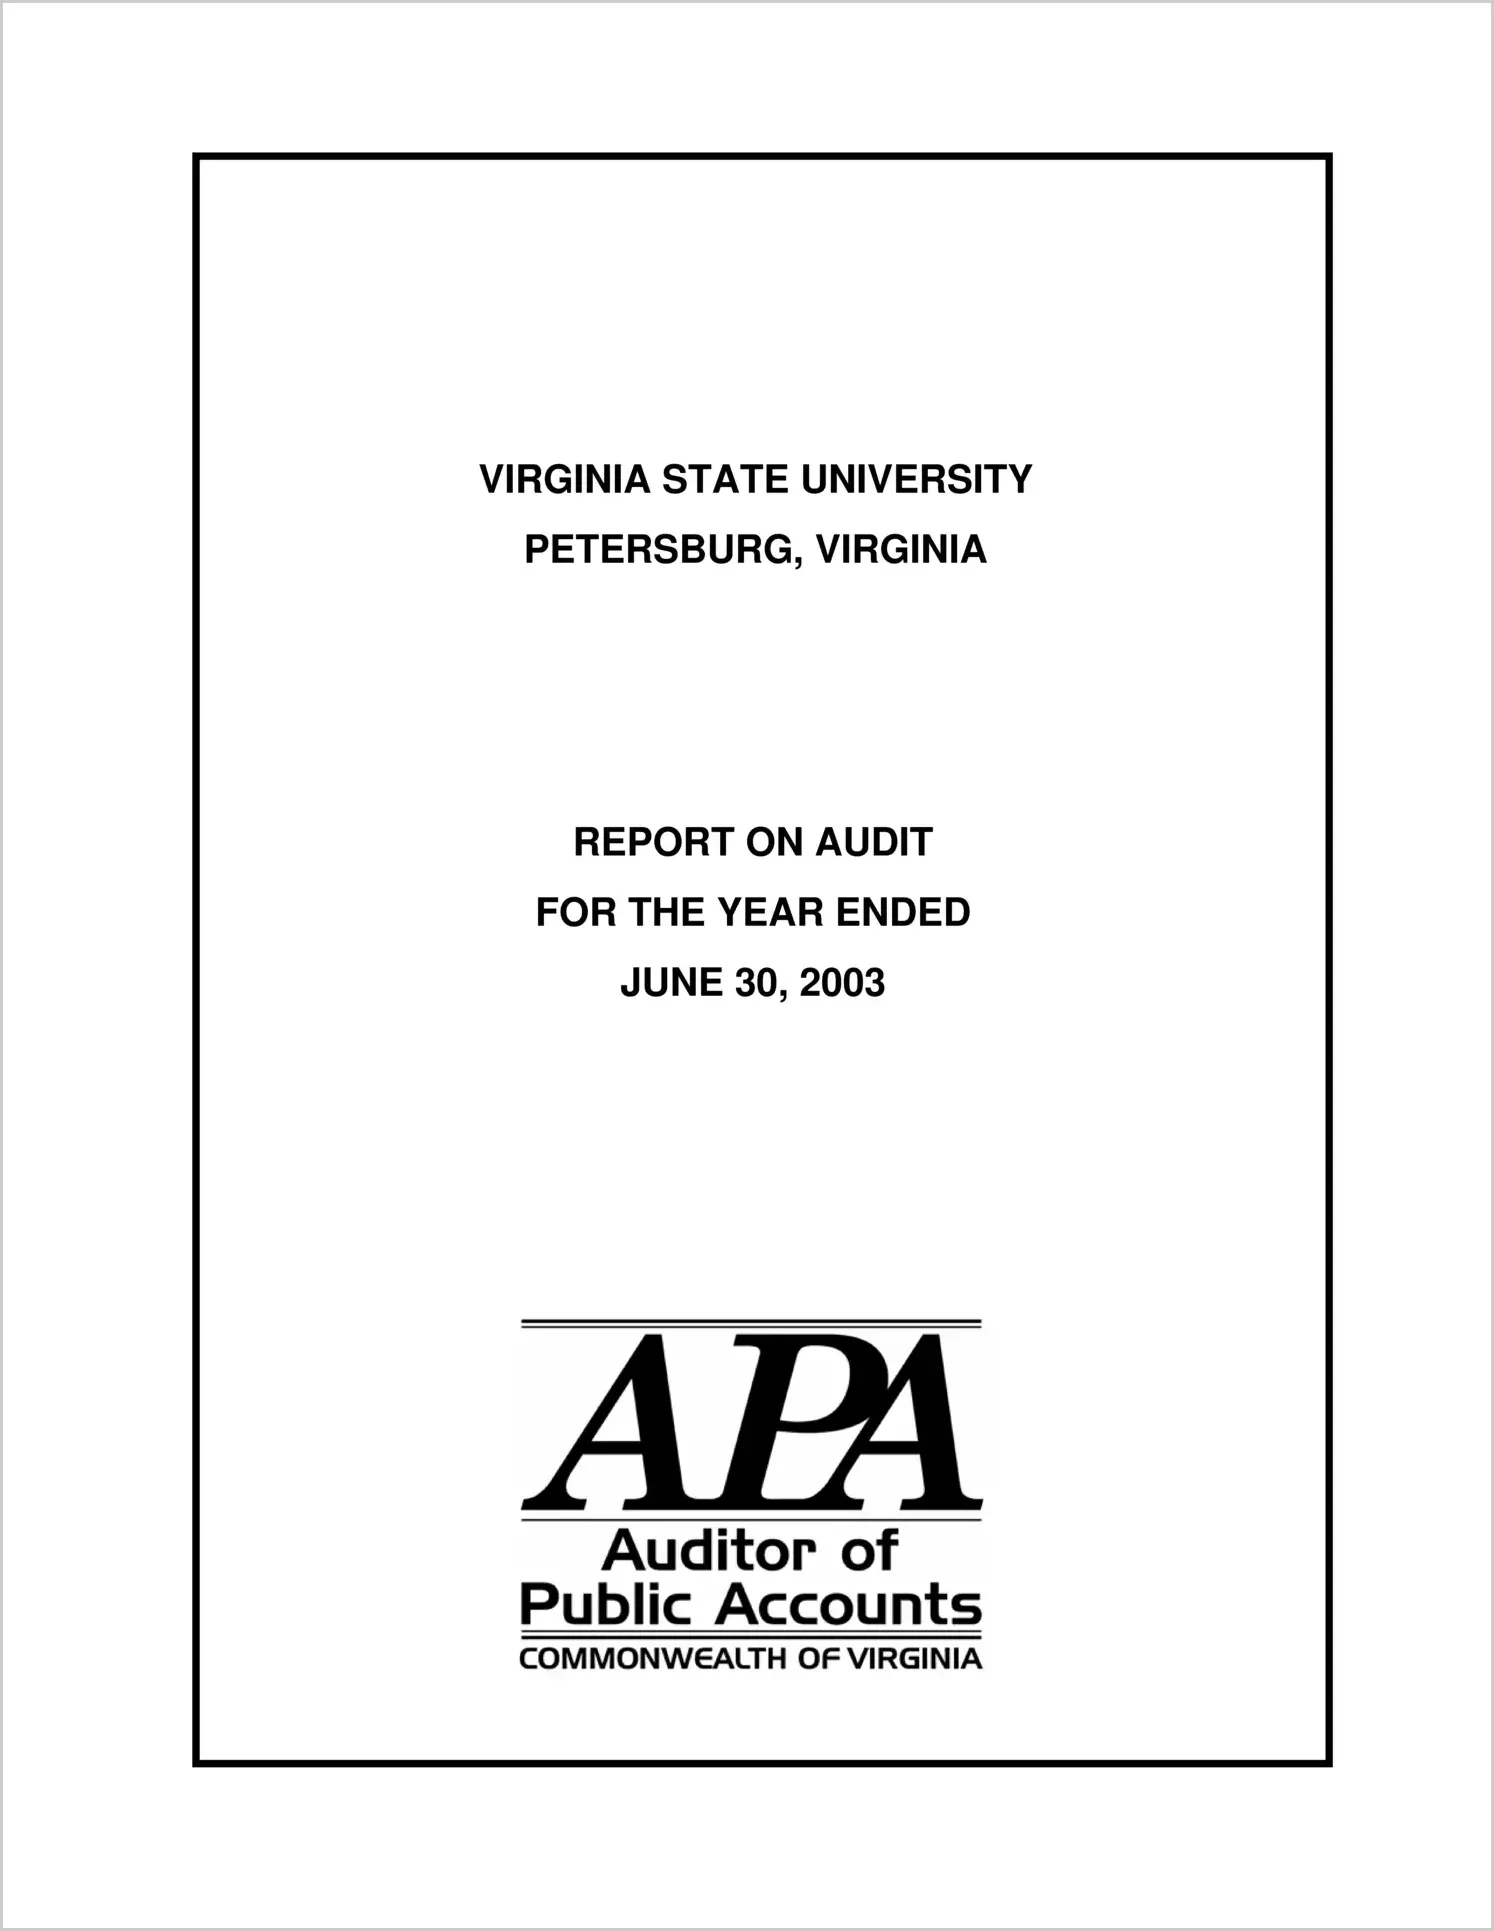 Virginia State University for the year ended June 30, 2003